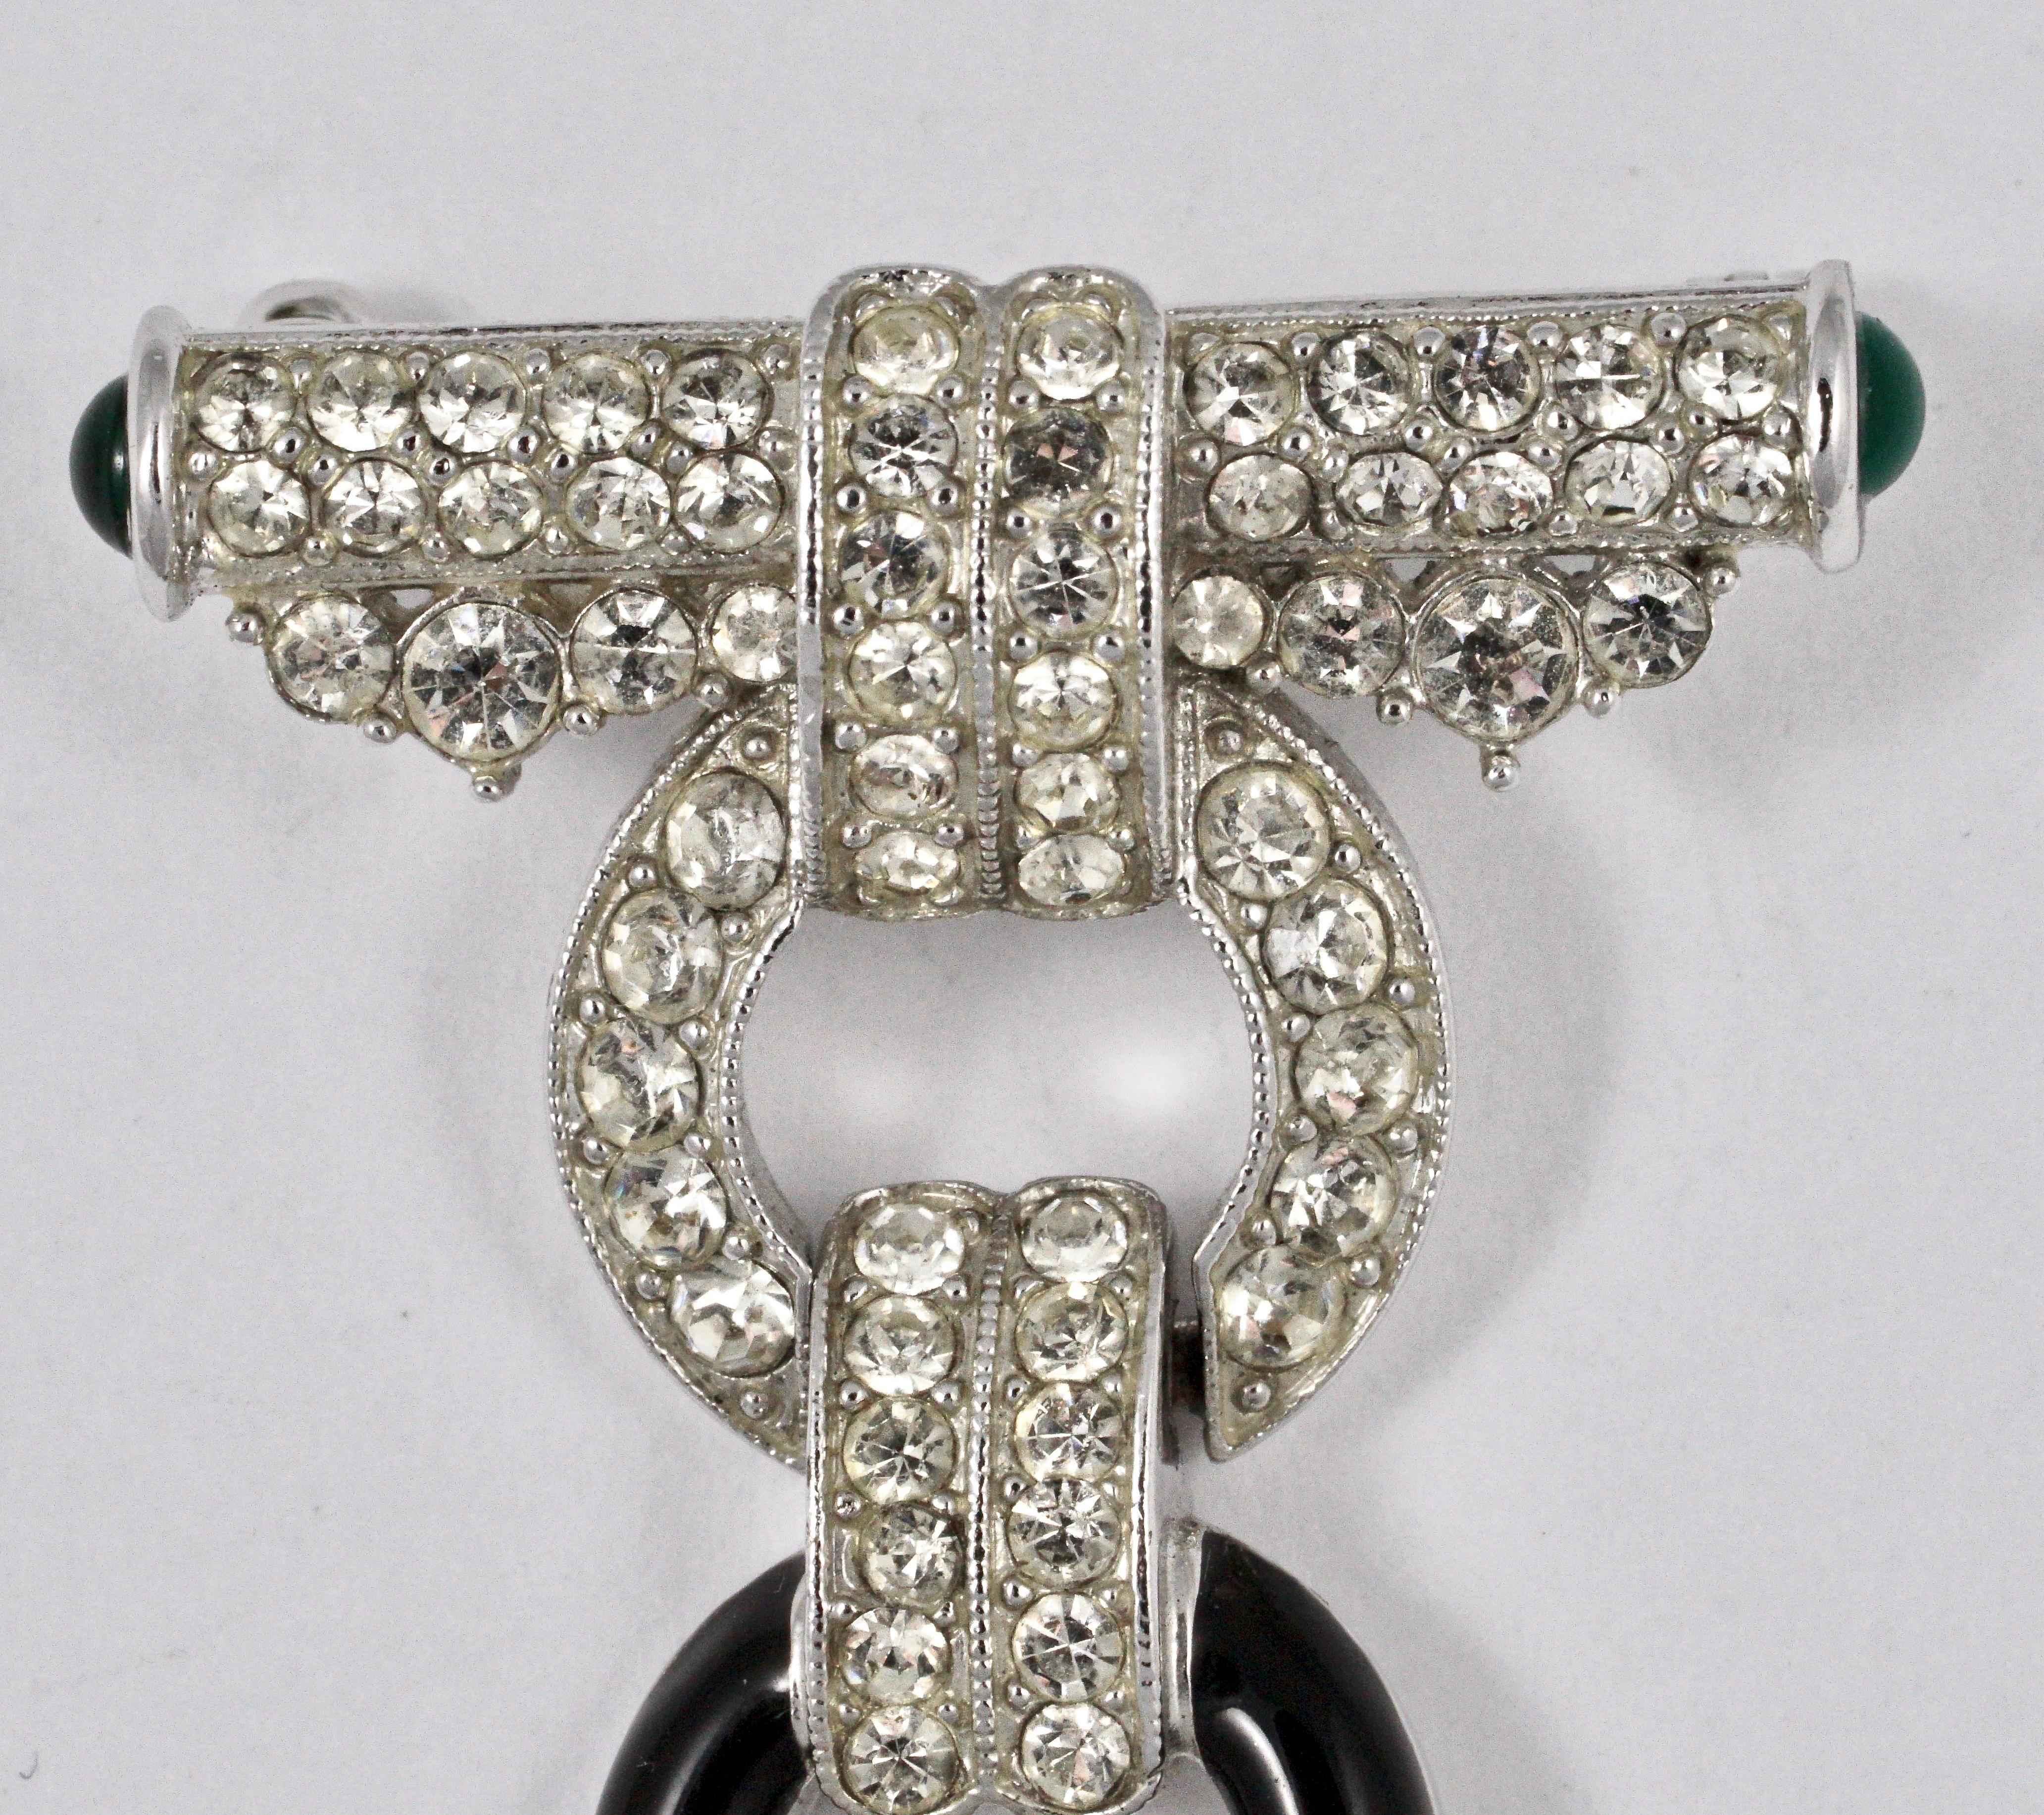 
Art Deco 89 fabulous silver tone brooch, featuring a drop with three circles and a rectangular pendant with the letters A D C, serial number B454. The brooch is embellished with clear rhinestones, and has black enamel highlights. The top of the